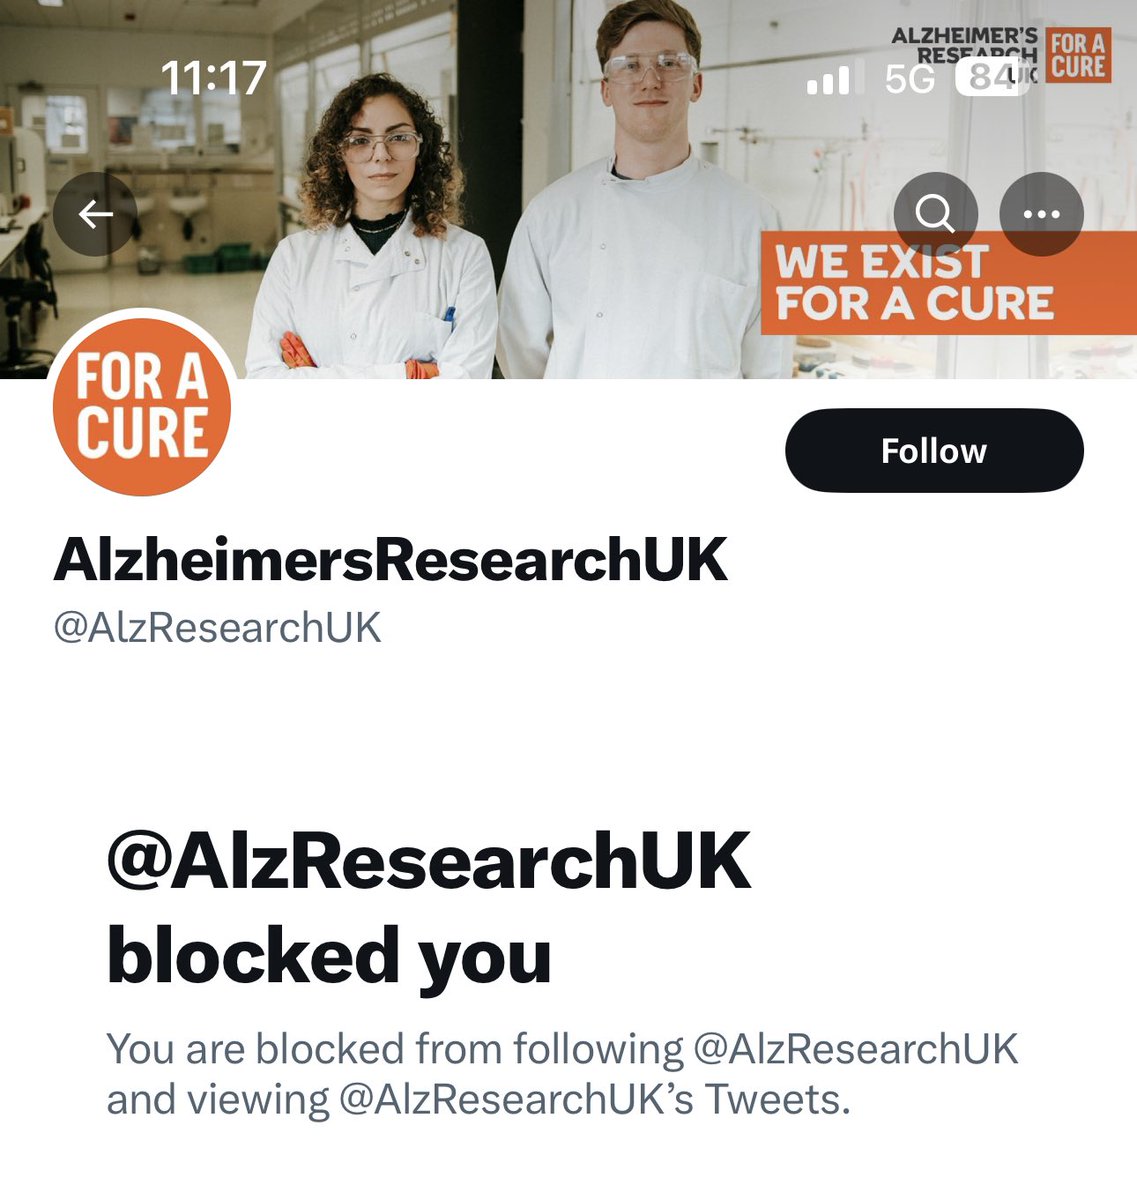 When AlzheimersResearchUK @AlzResearchUK block you for suggesting they should talk about prevention! 

Please TAG & RT 

@gina @MeetJess @fred_hallgren @gwladwr @dbdugger @EnemyInAState @ProfRobHoward @mrmickme @RealCheckMarker @_ppmv @lisa_iannattone @drclairetaylor @Sunny_Rae1